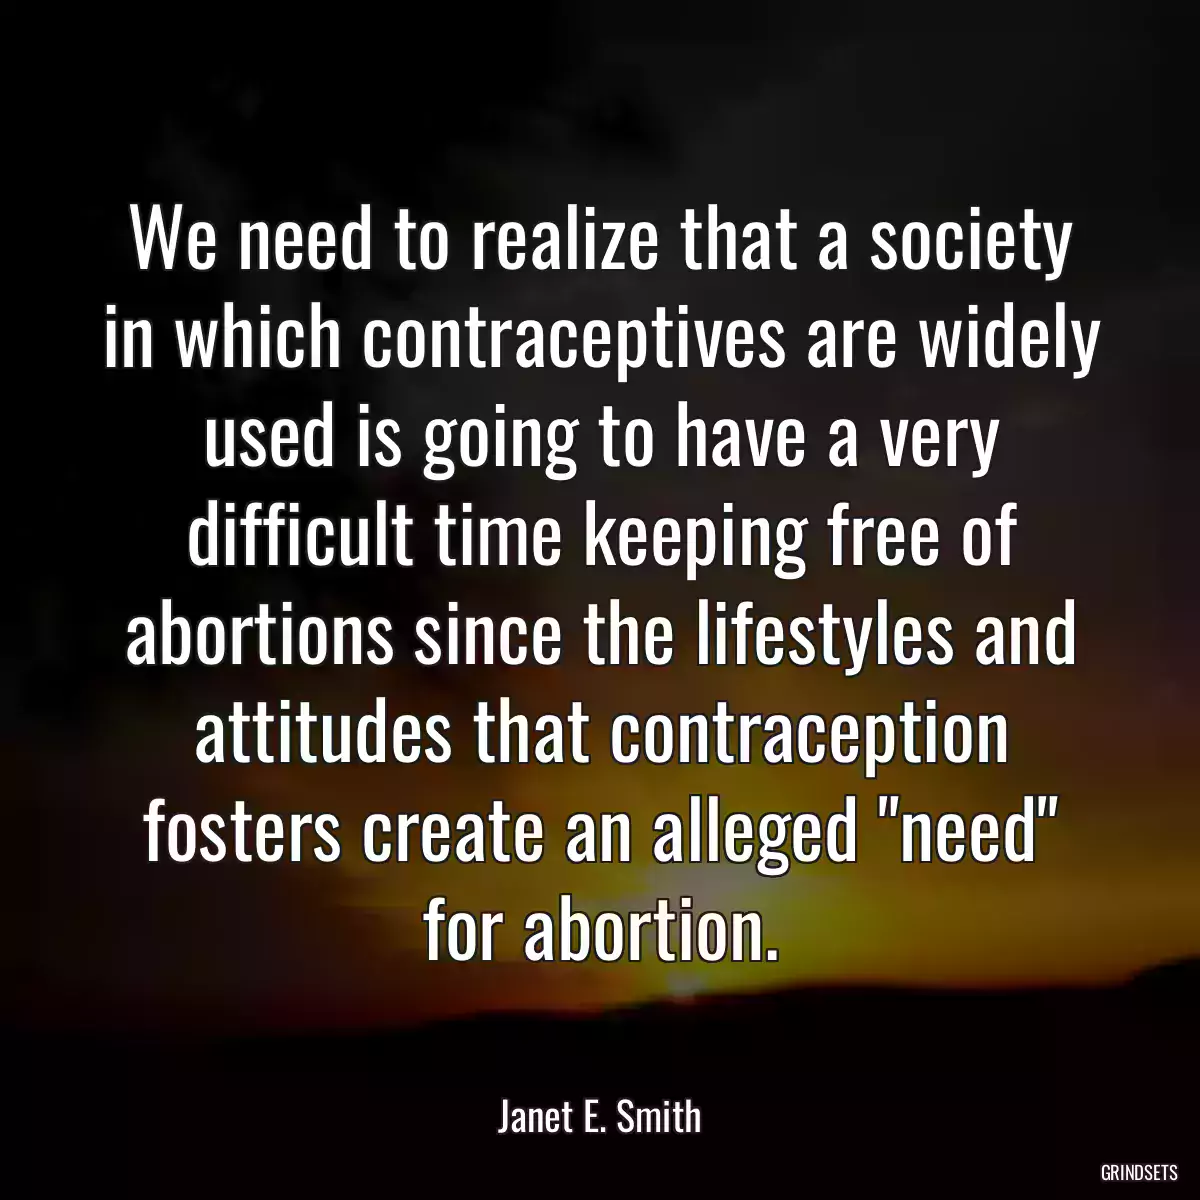 We need to realize that a society in which contraceptives are widely used is going to have a very difficult time keeping free of abortions since the lifestyles and attitudes that contraception fosters create an alleged \